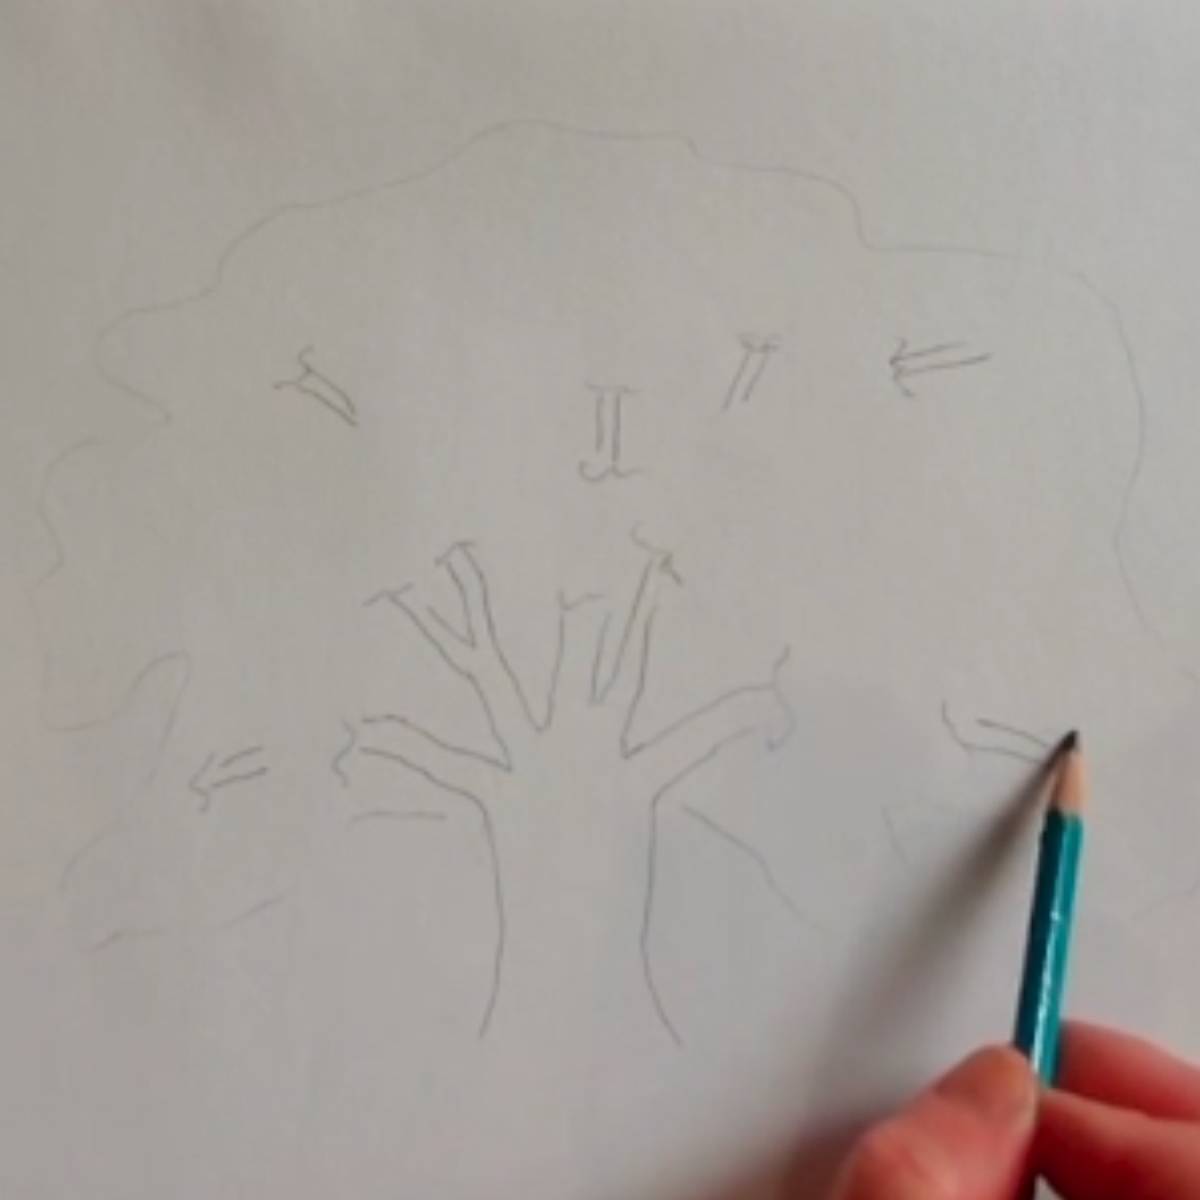 Sketch of trunk, branches, and outside of the tree with the artist's hand and pencil.